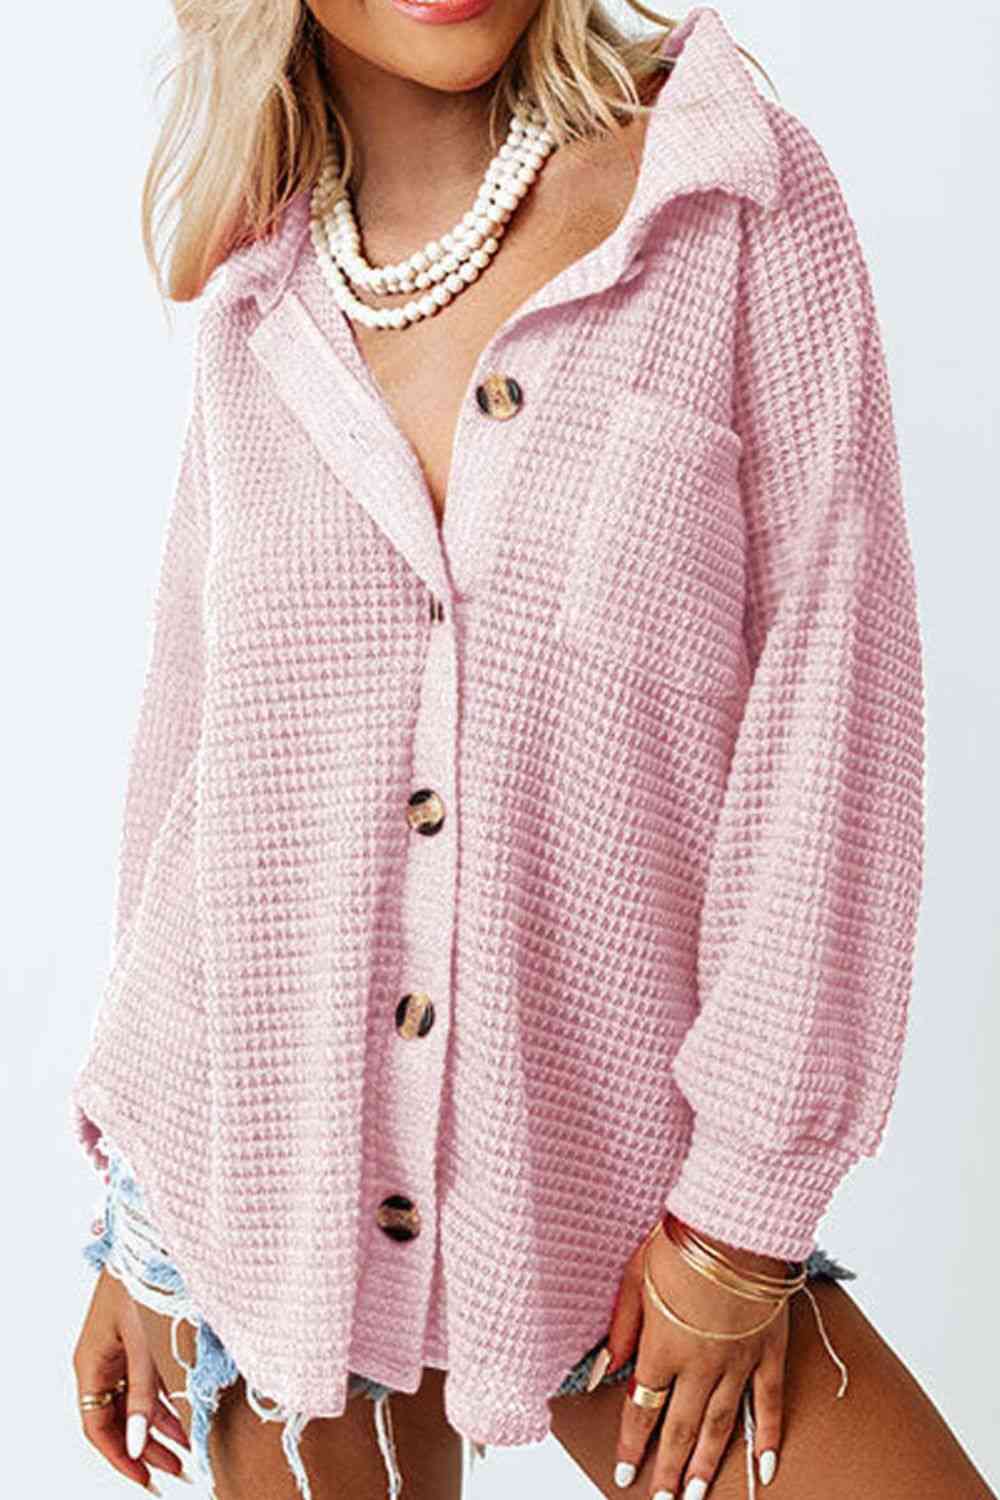 Waffle-Knit Button Up Long Sleeve Shirt with Pocket (10 Colors)  Krazy Heart Designs Boutique Blush Pink S 